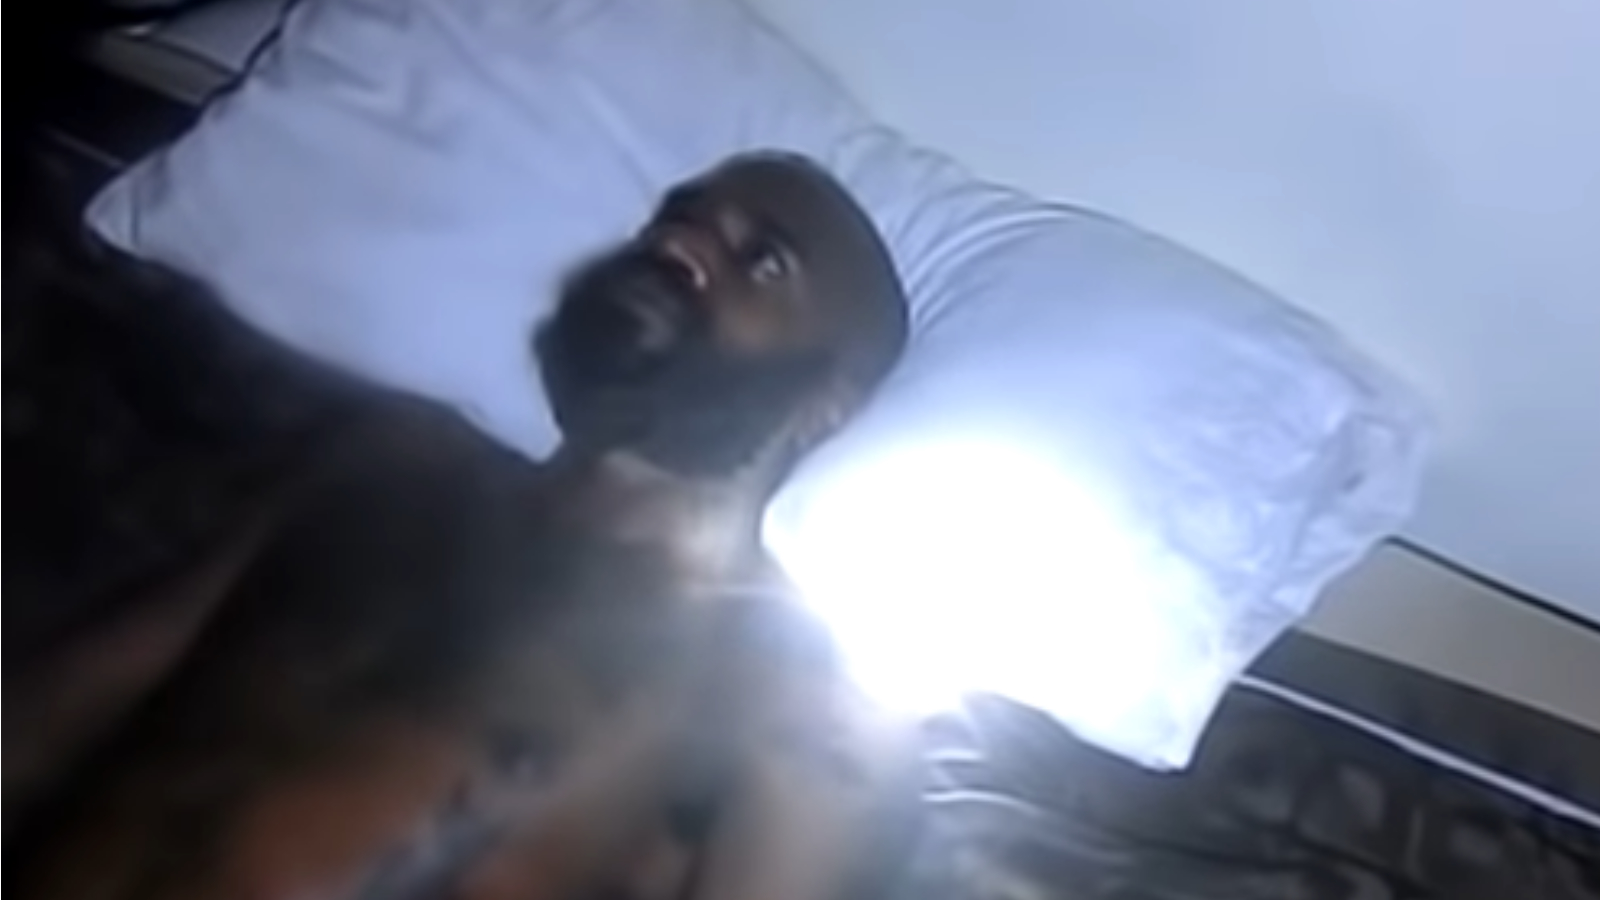 MC Ride laying in bed Blank Meme Template